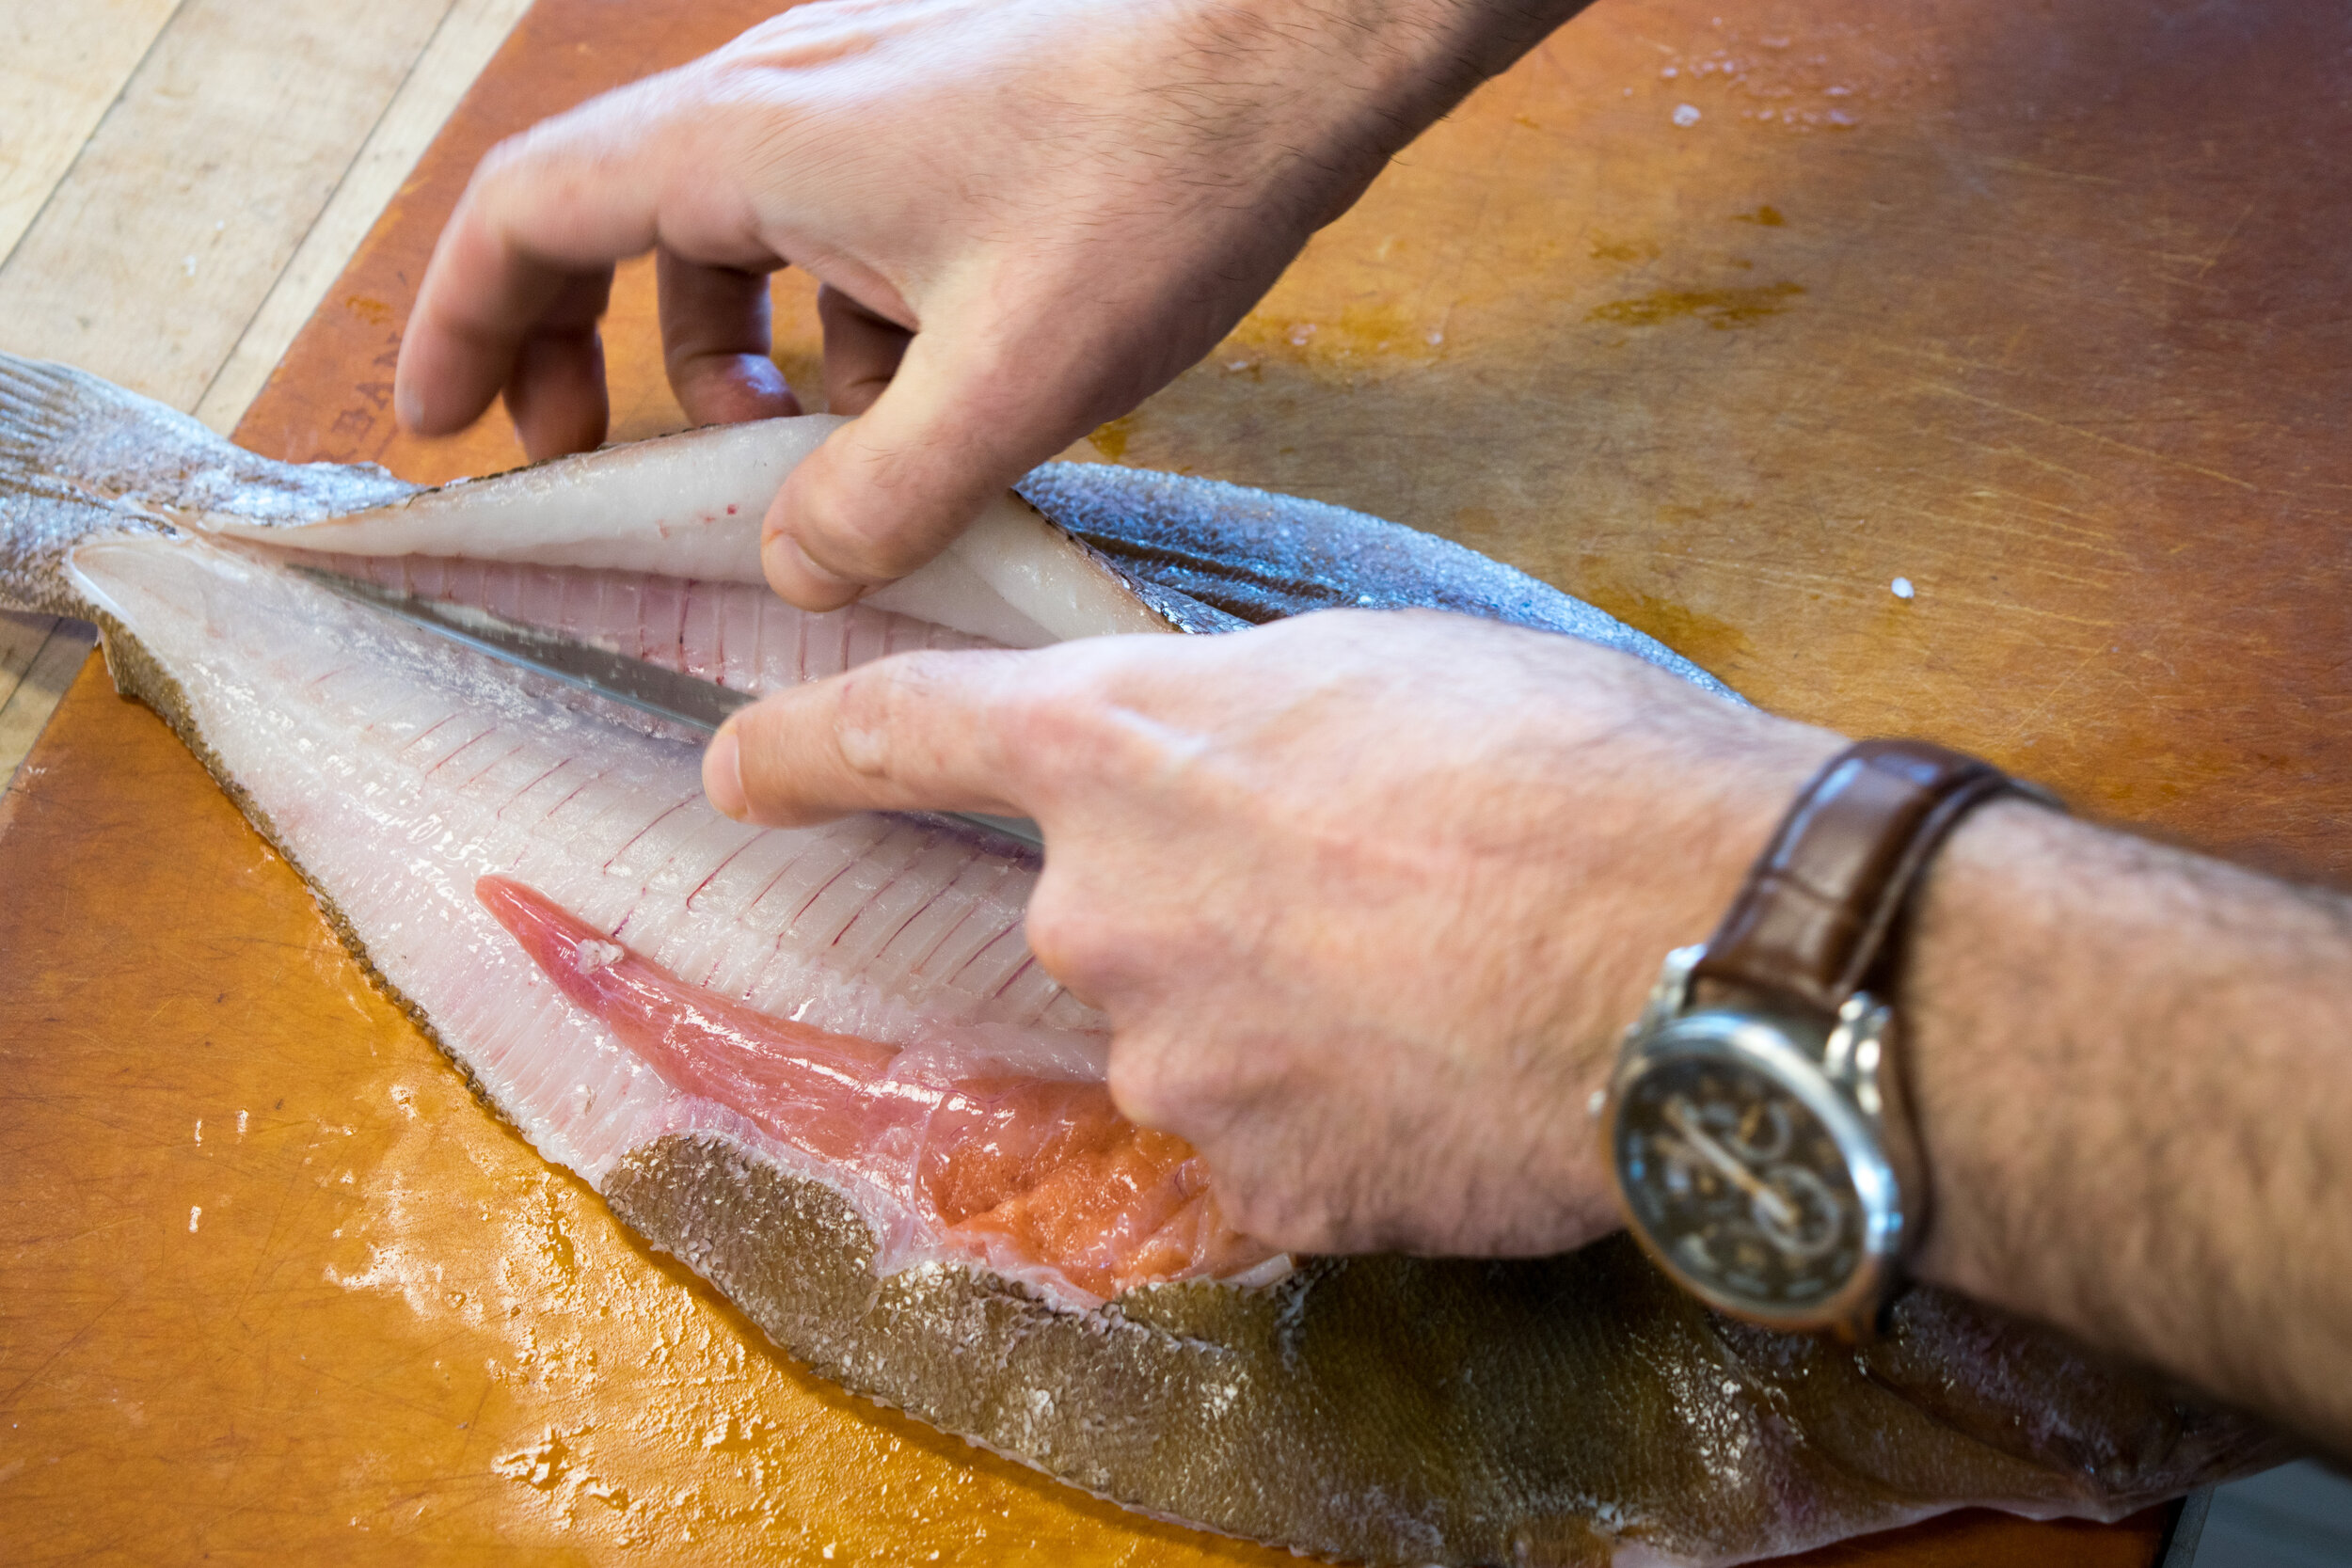 Step 6. Turn the fish around  and slide the knife under the flesh on the other side.